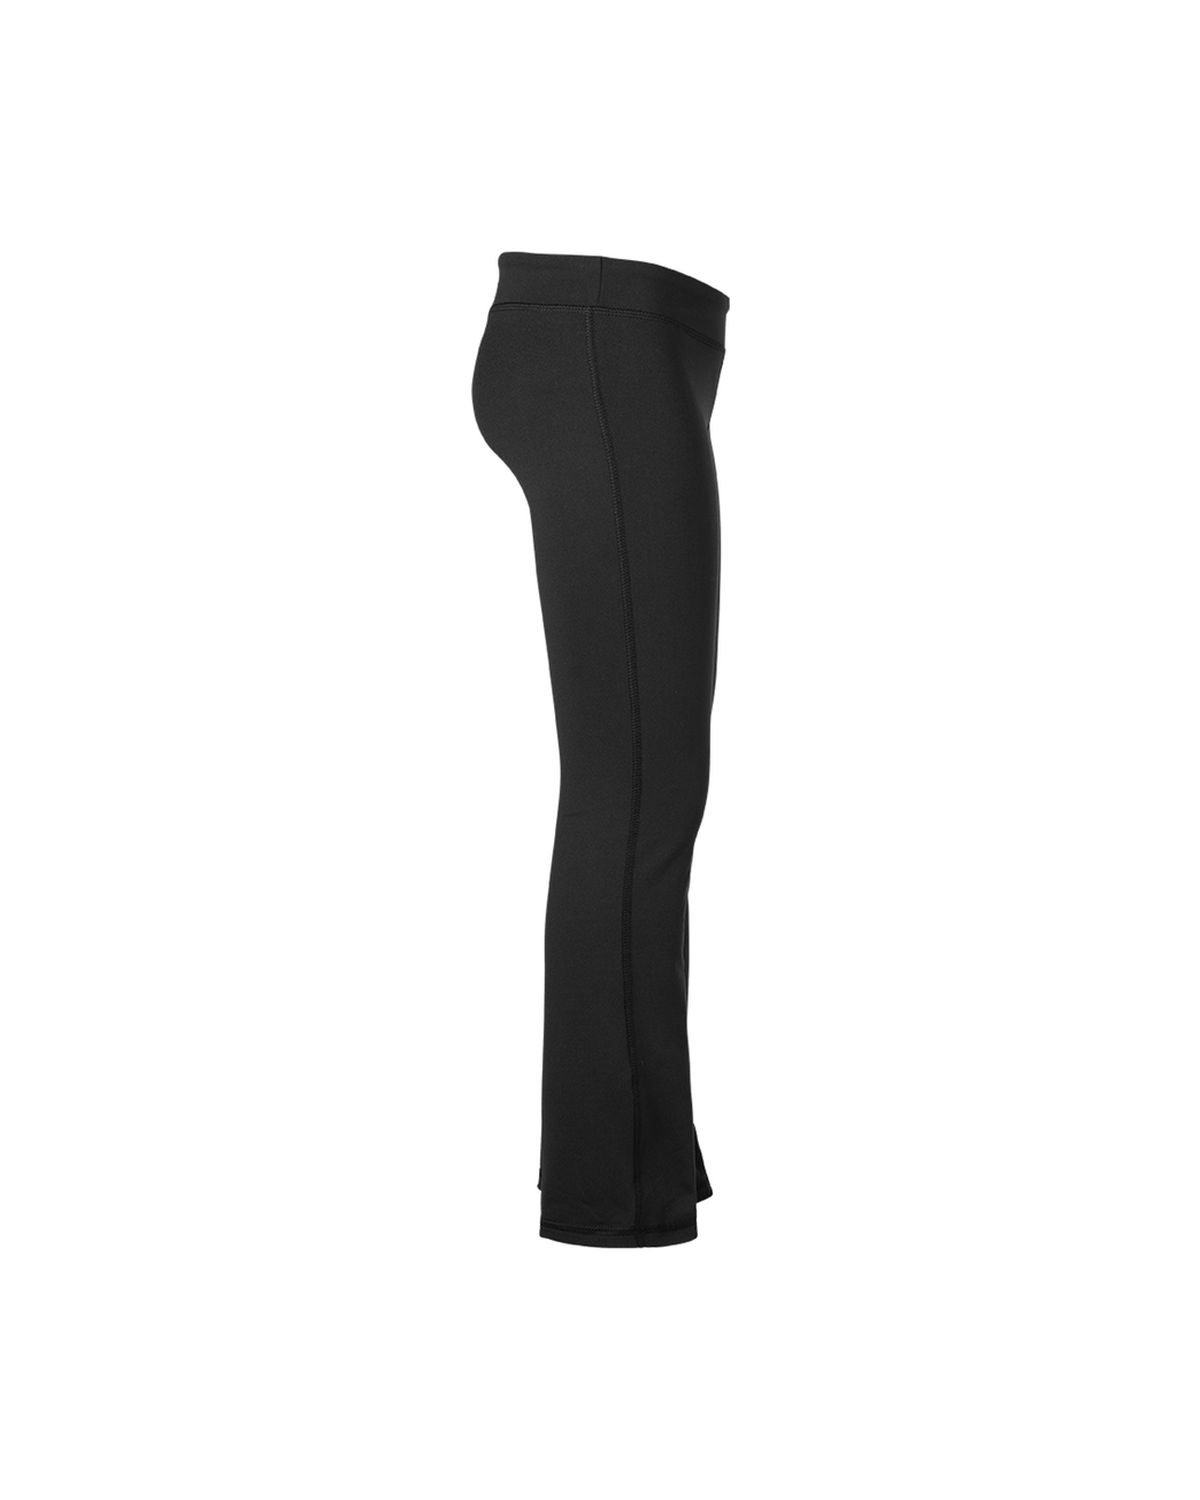 'Soffe 1153G Girls Boot Pant'